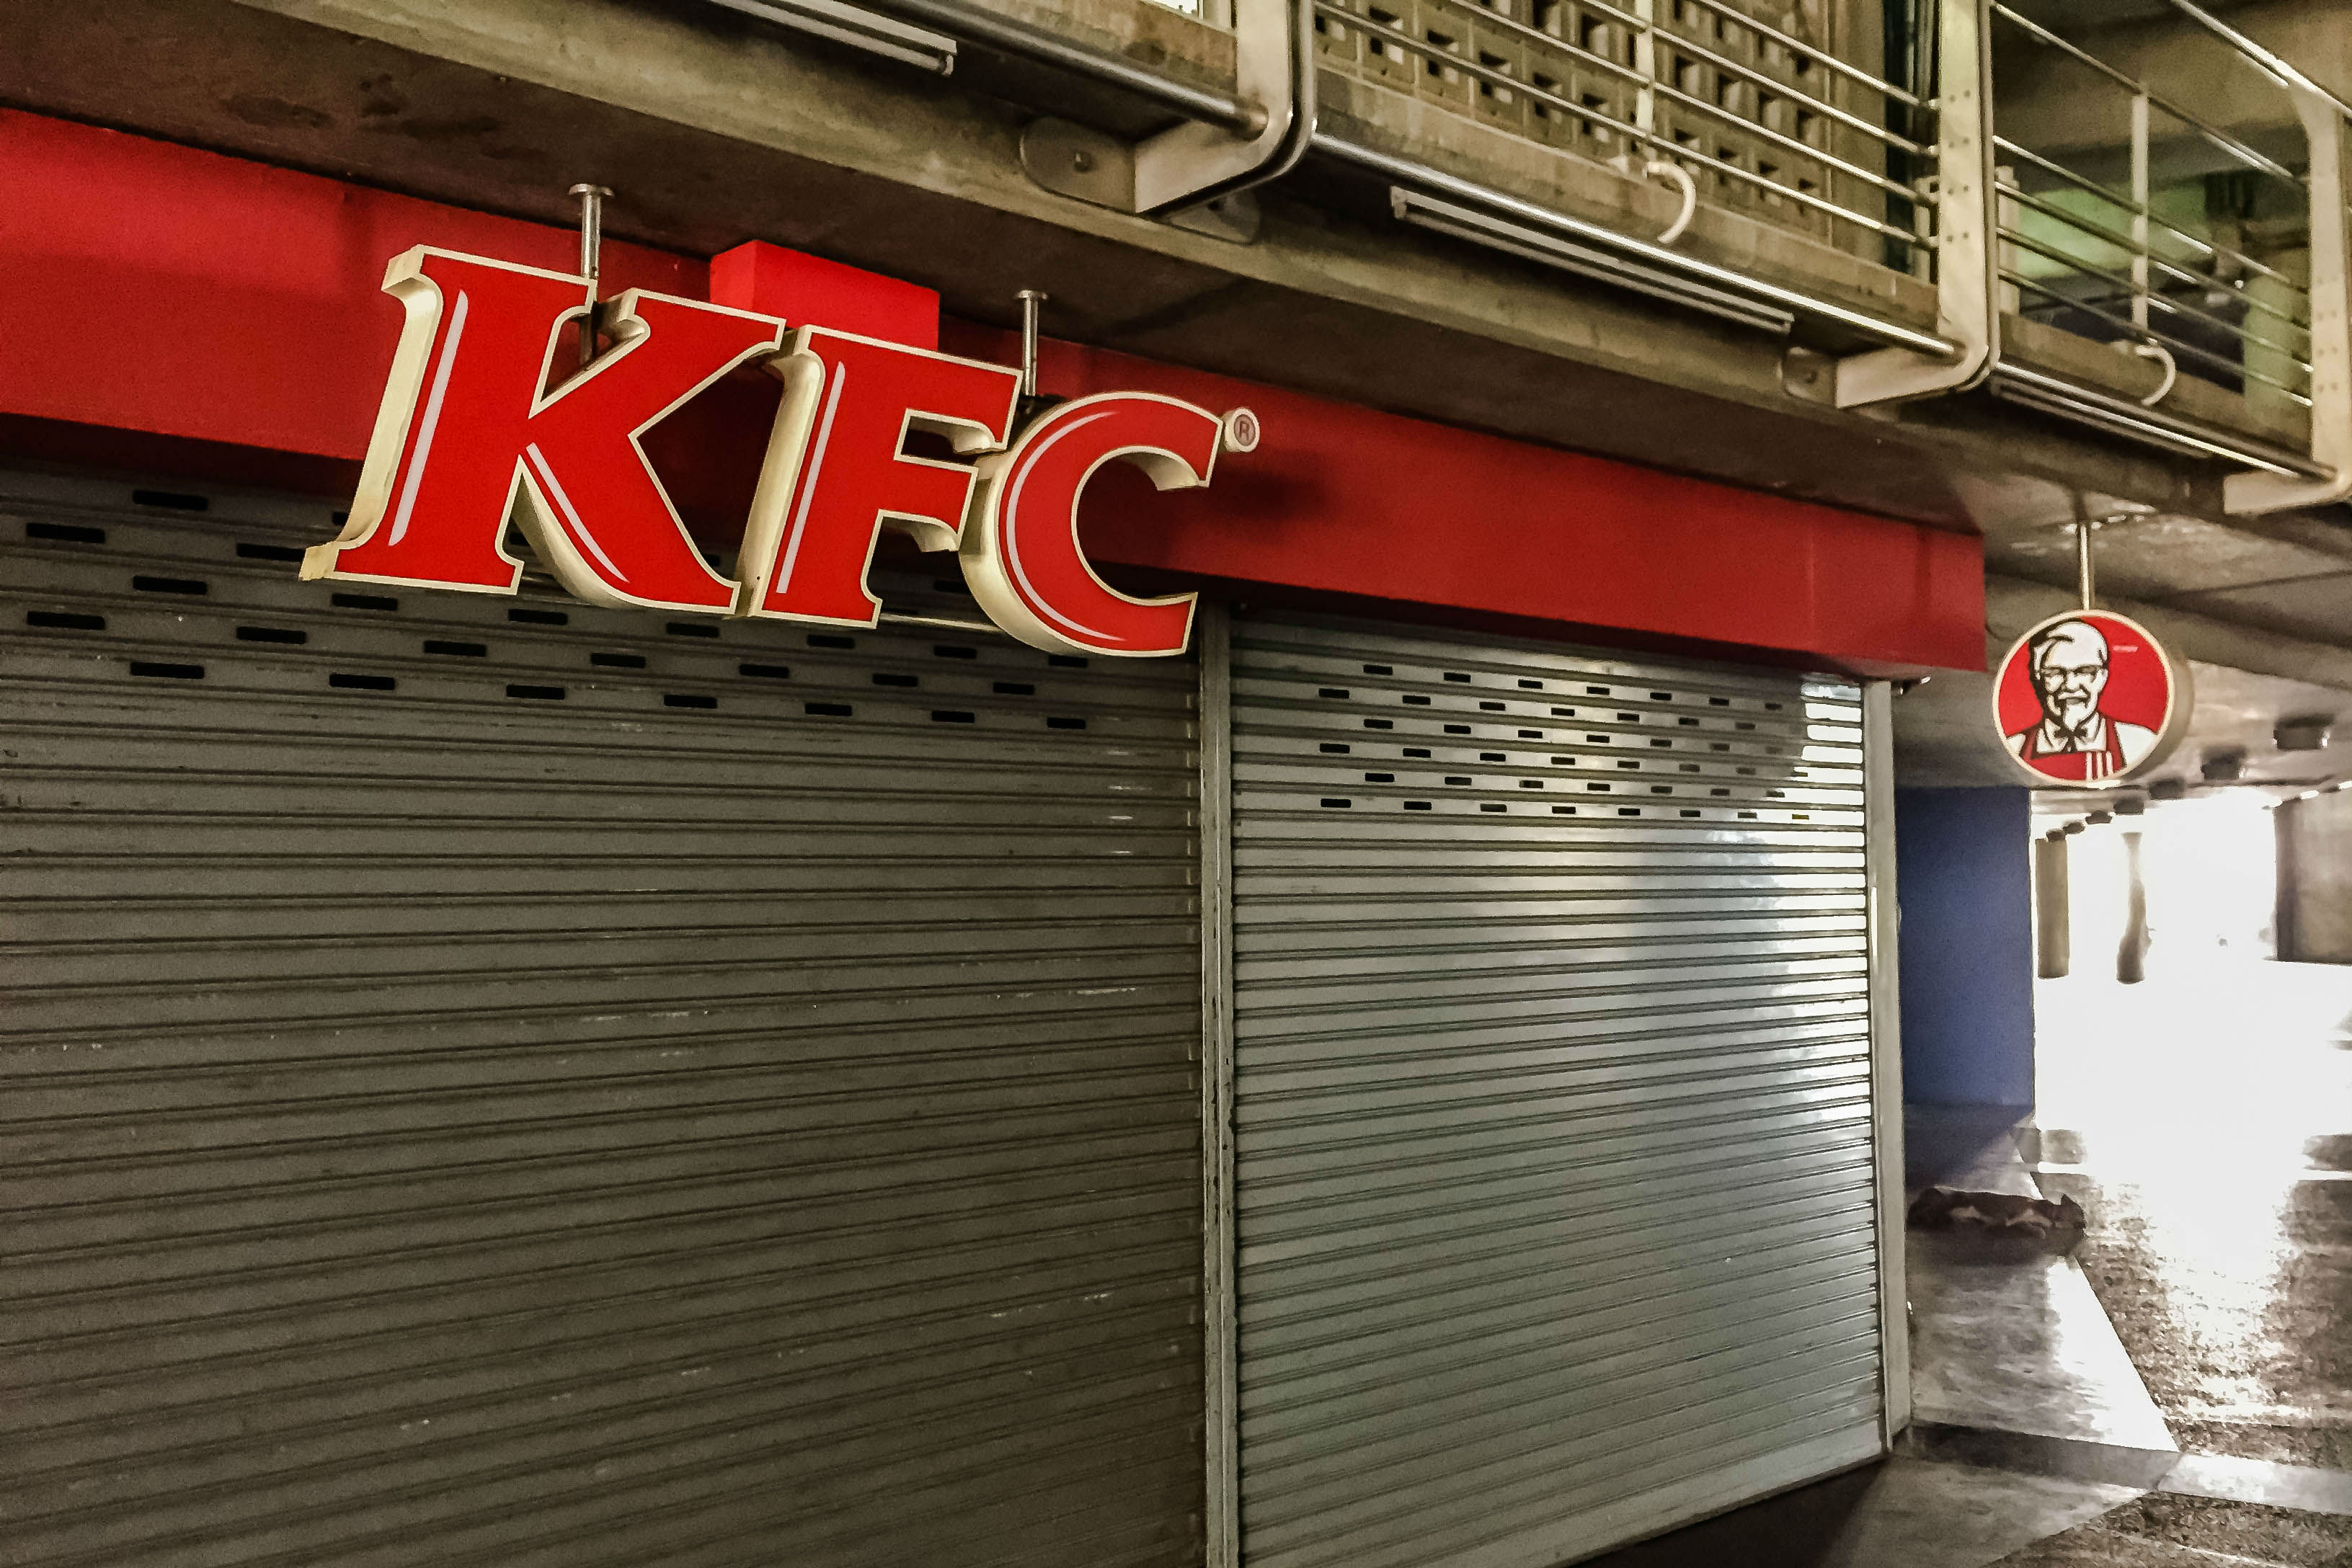 A closed franchise (image: Sarunrod / Shutterstock)